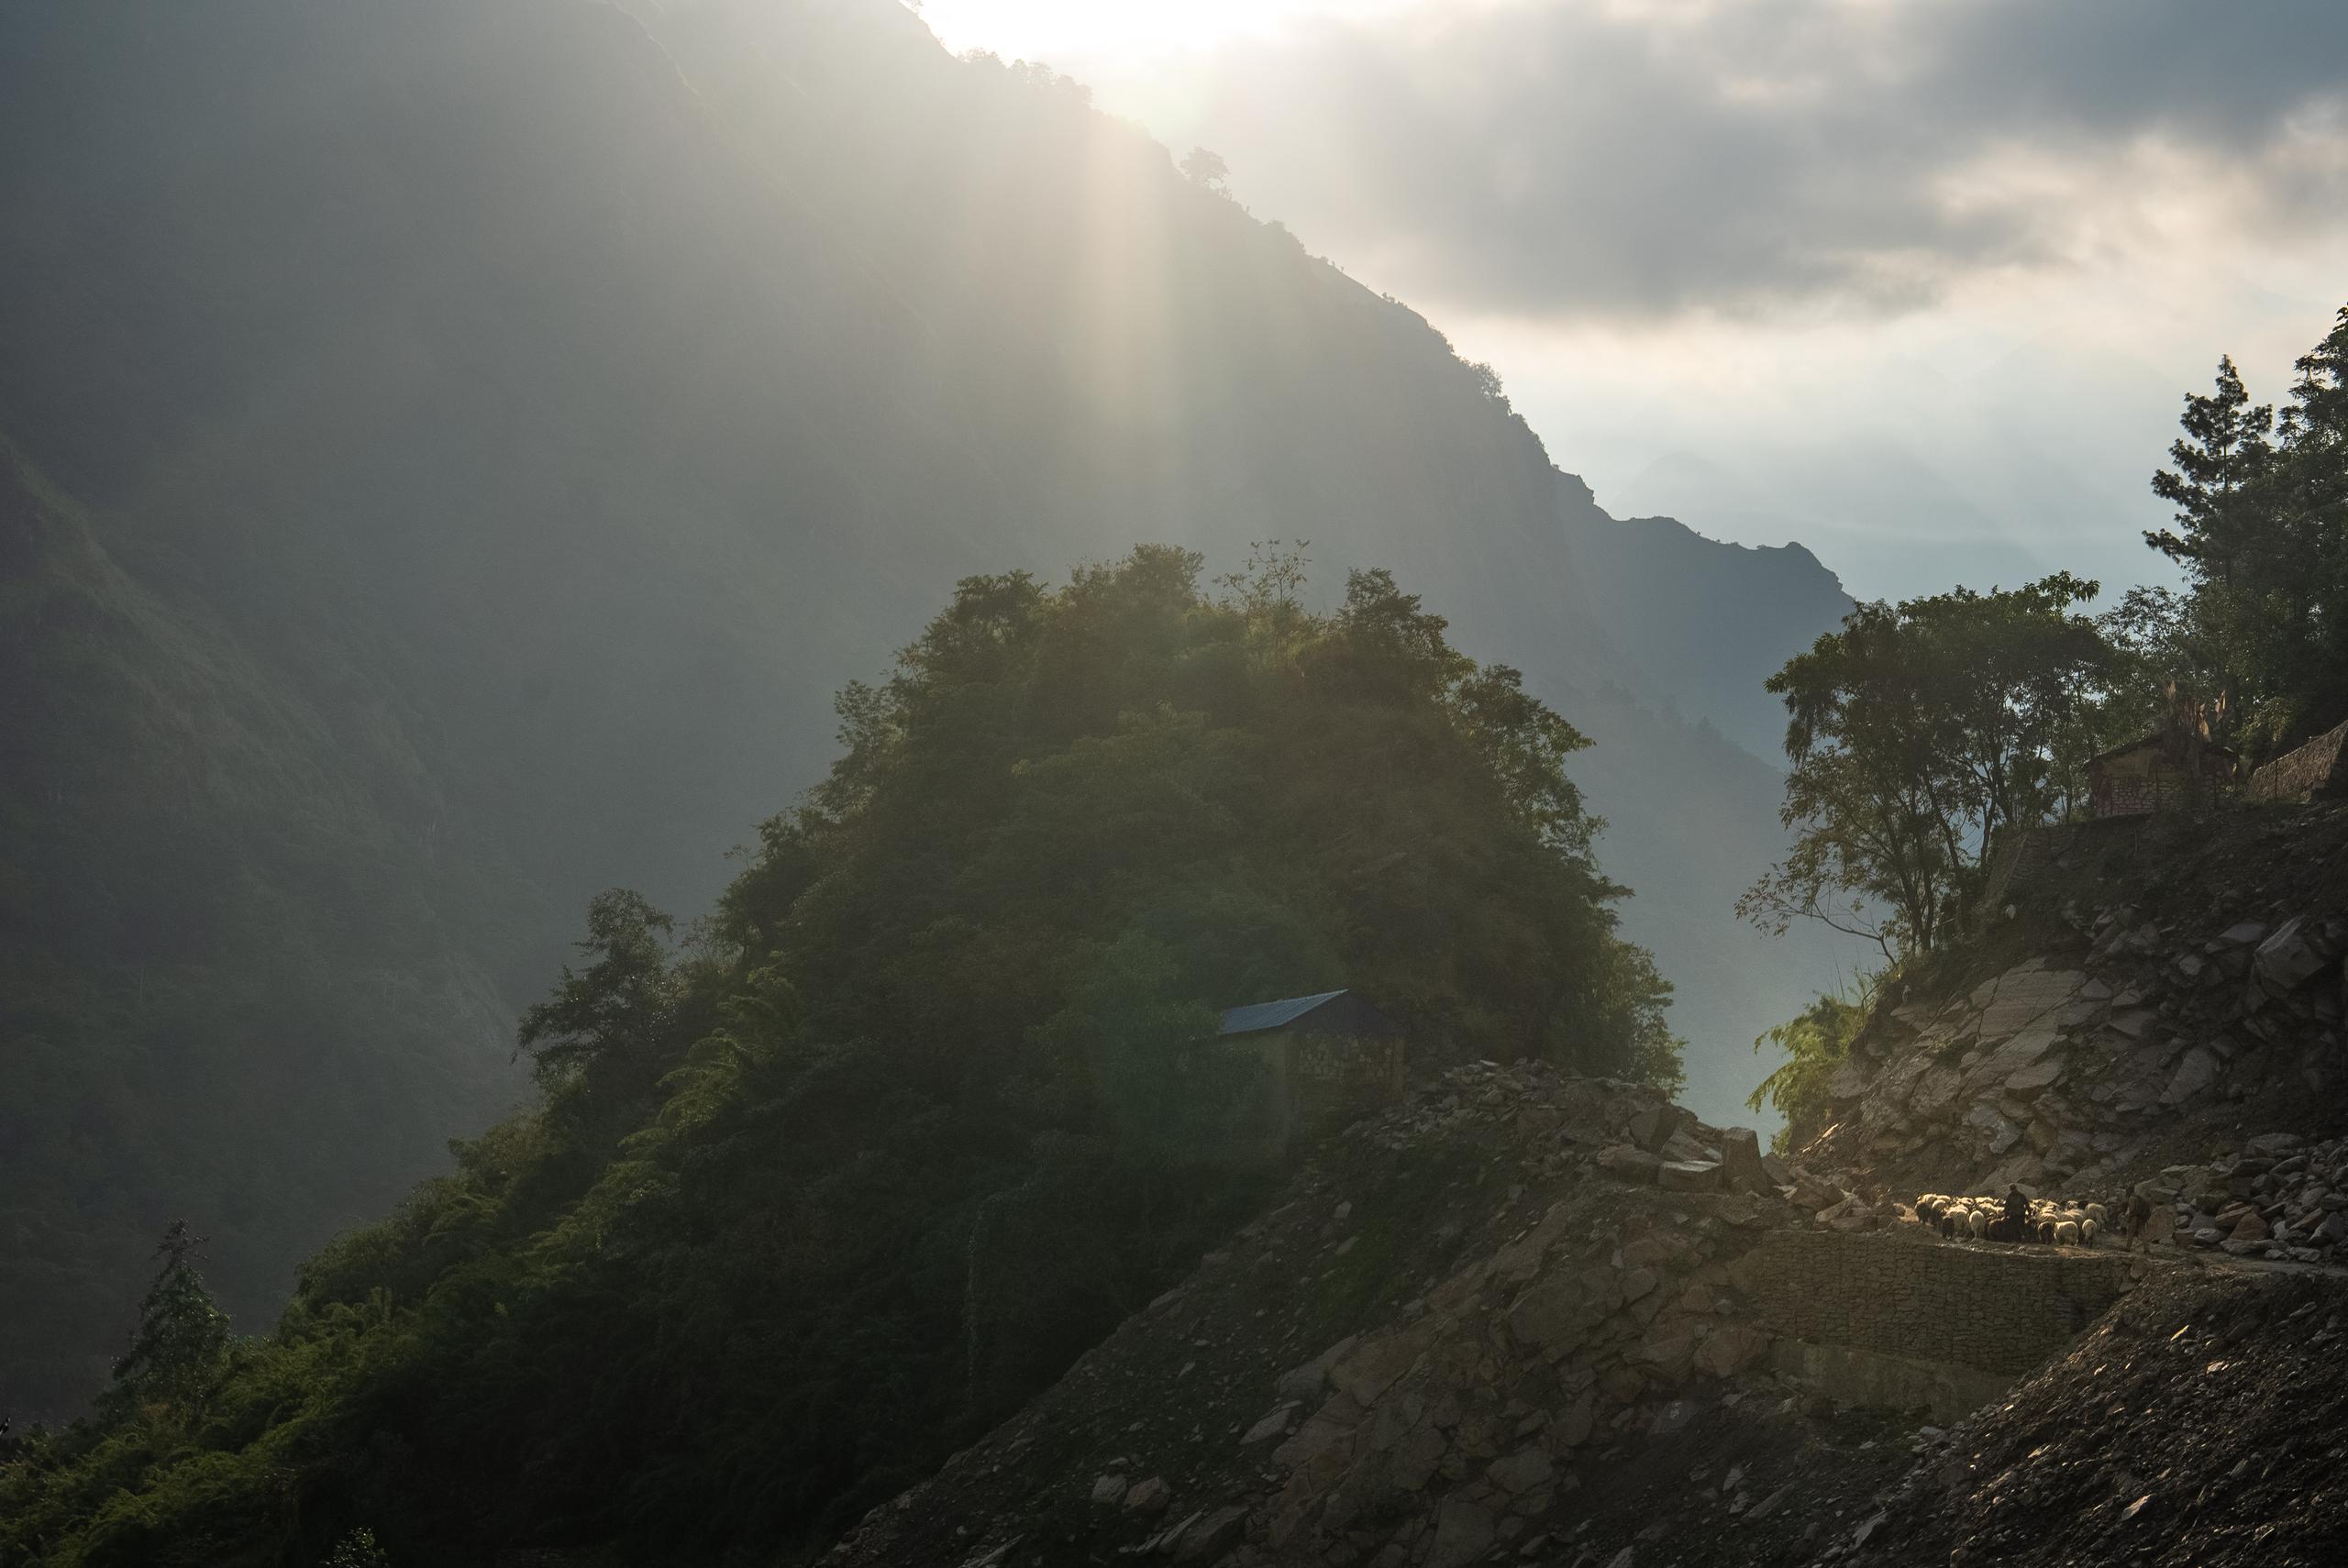 Sun peaking over mountains on Nepal casting light on small road with sheep and herders